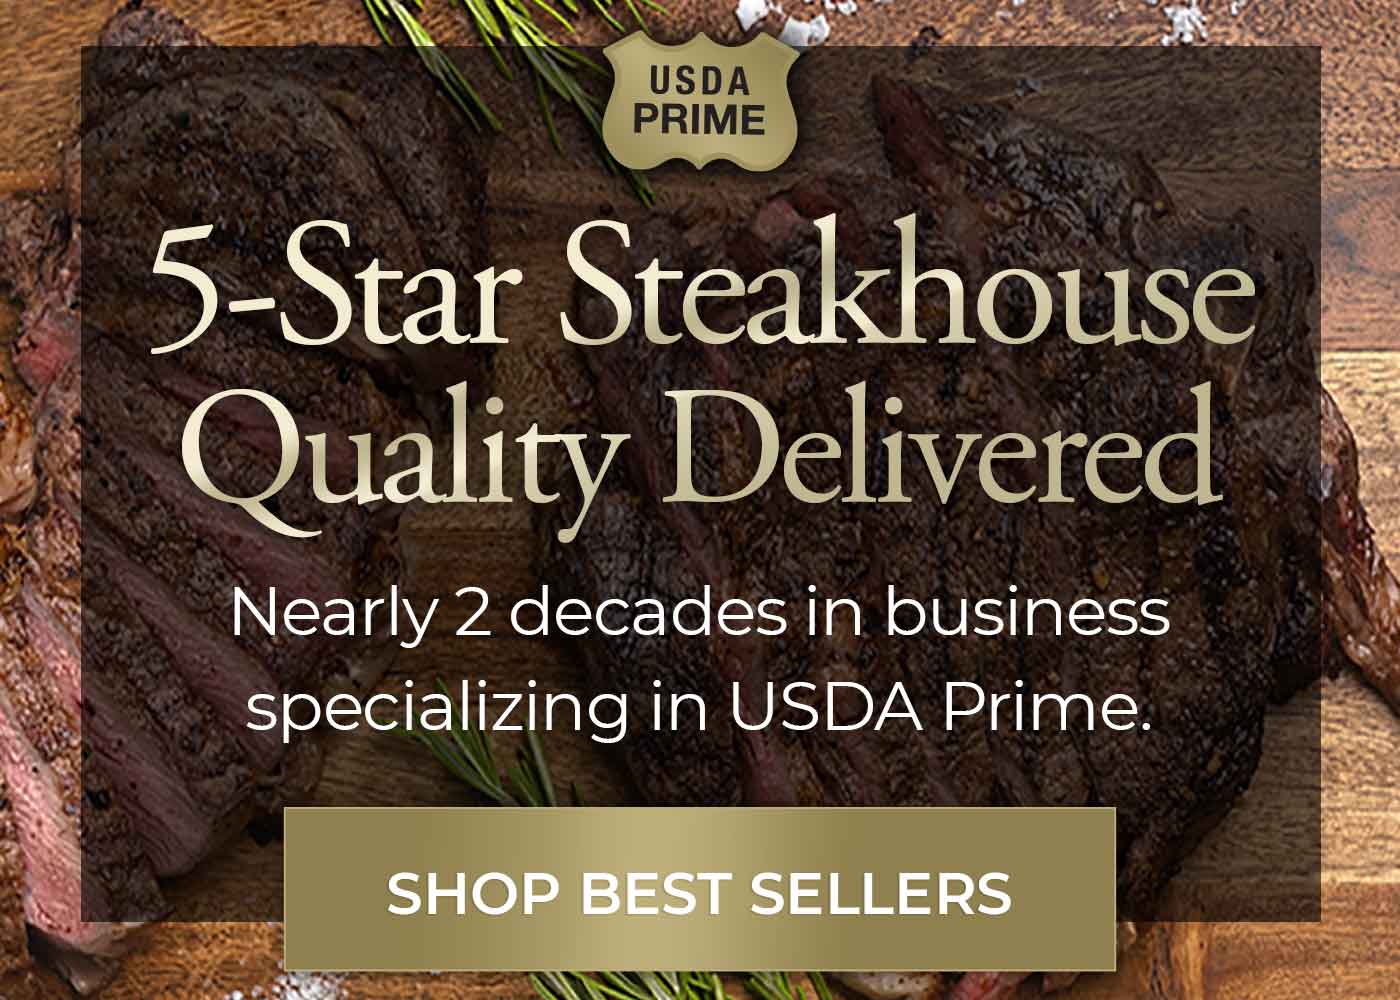 5-Star Steakhouse Quality nearly 2 decades in business specializing in USDA Prime. Shop Holiday Gifts